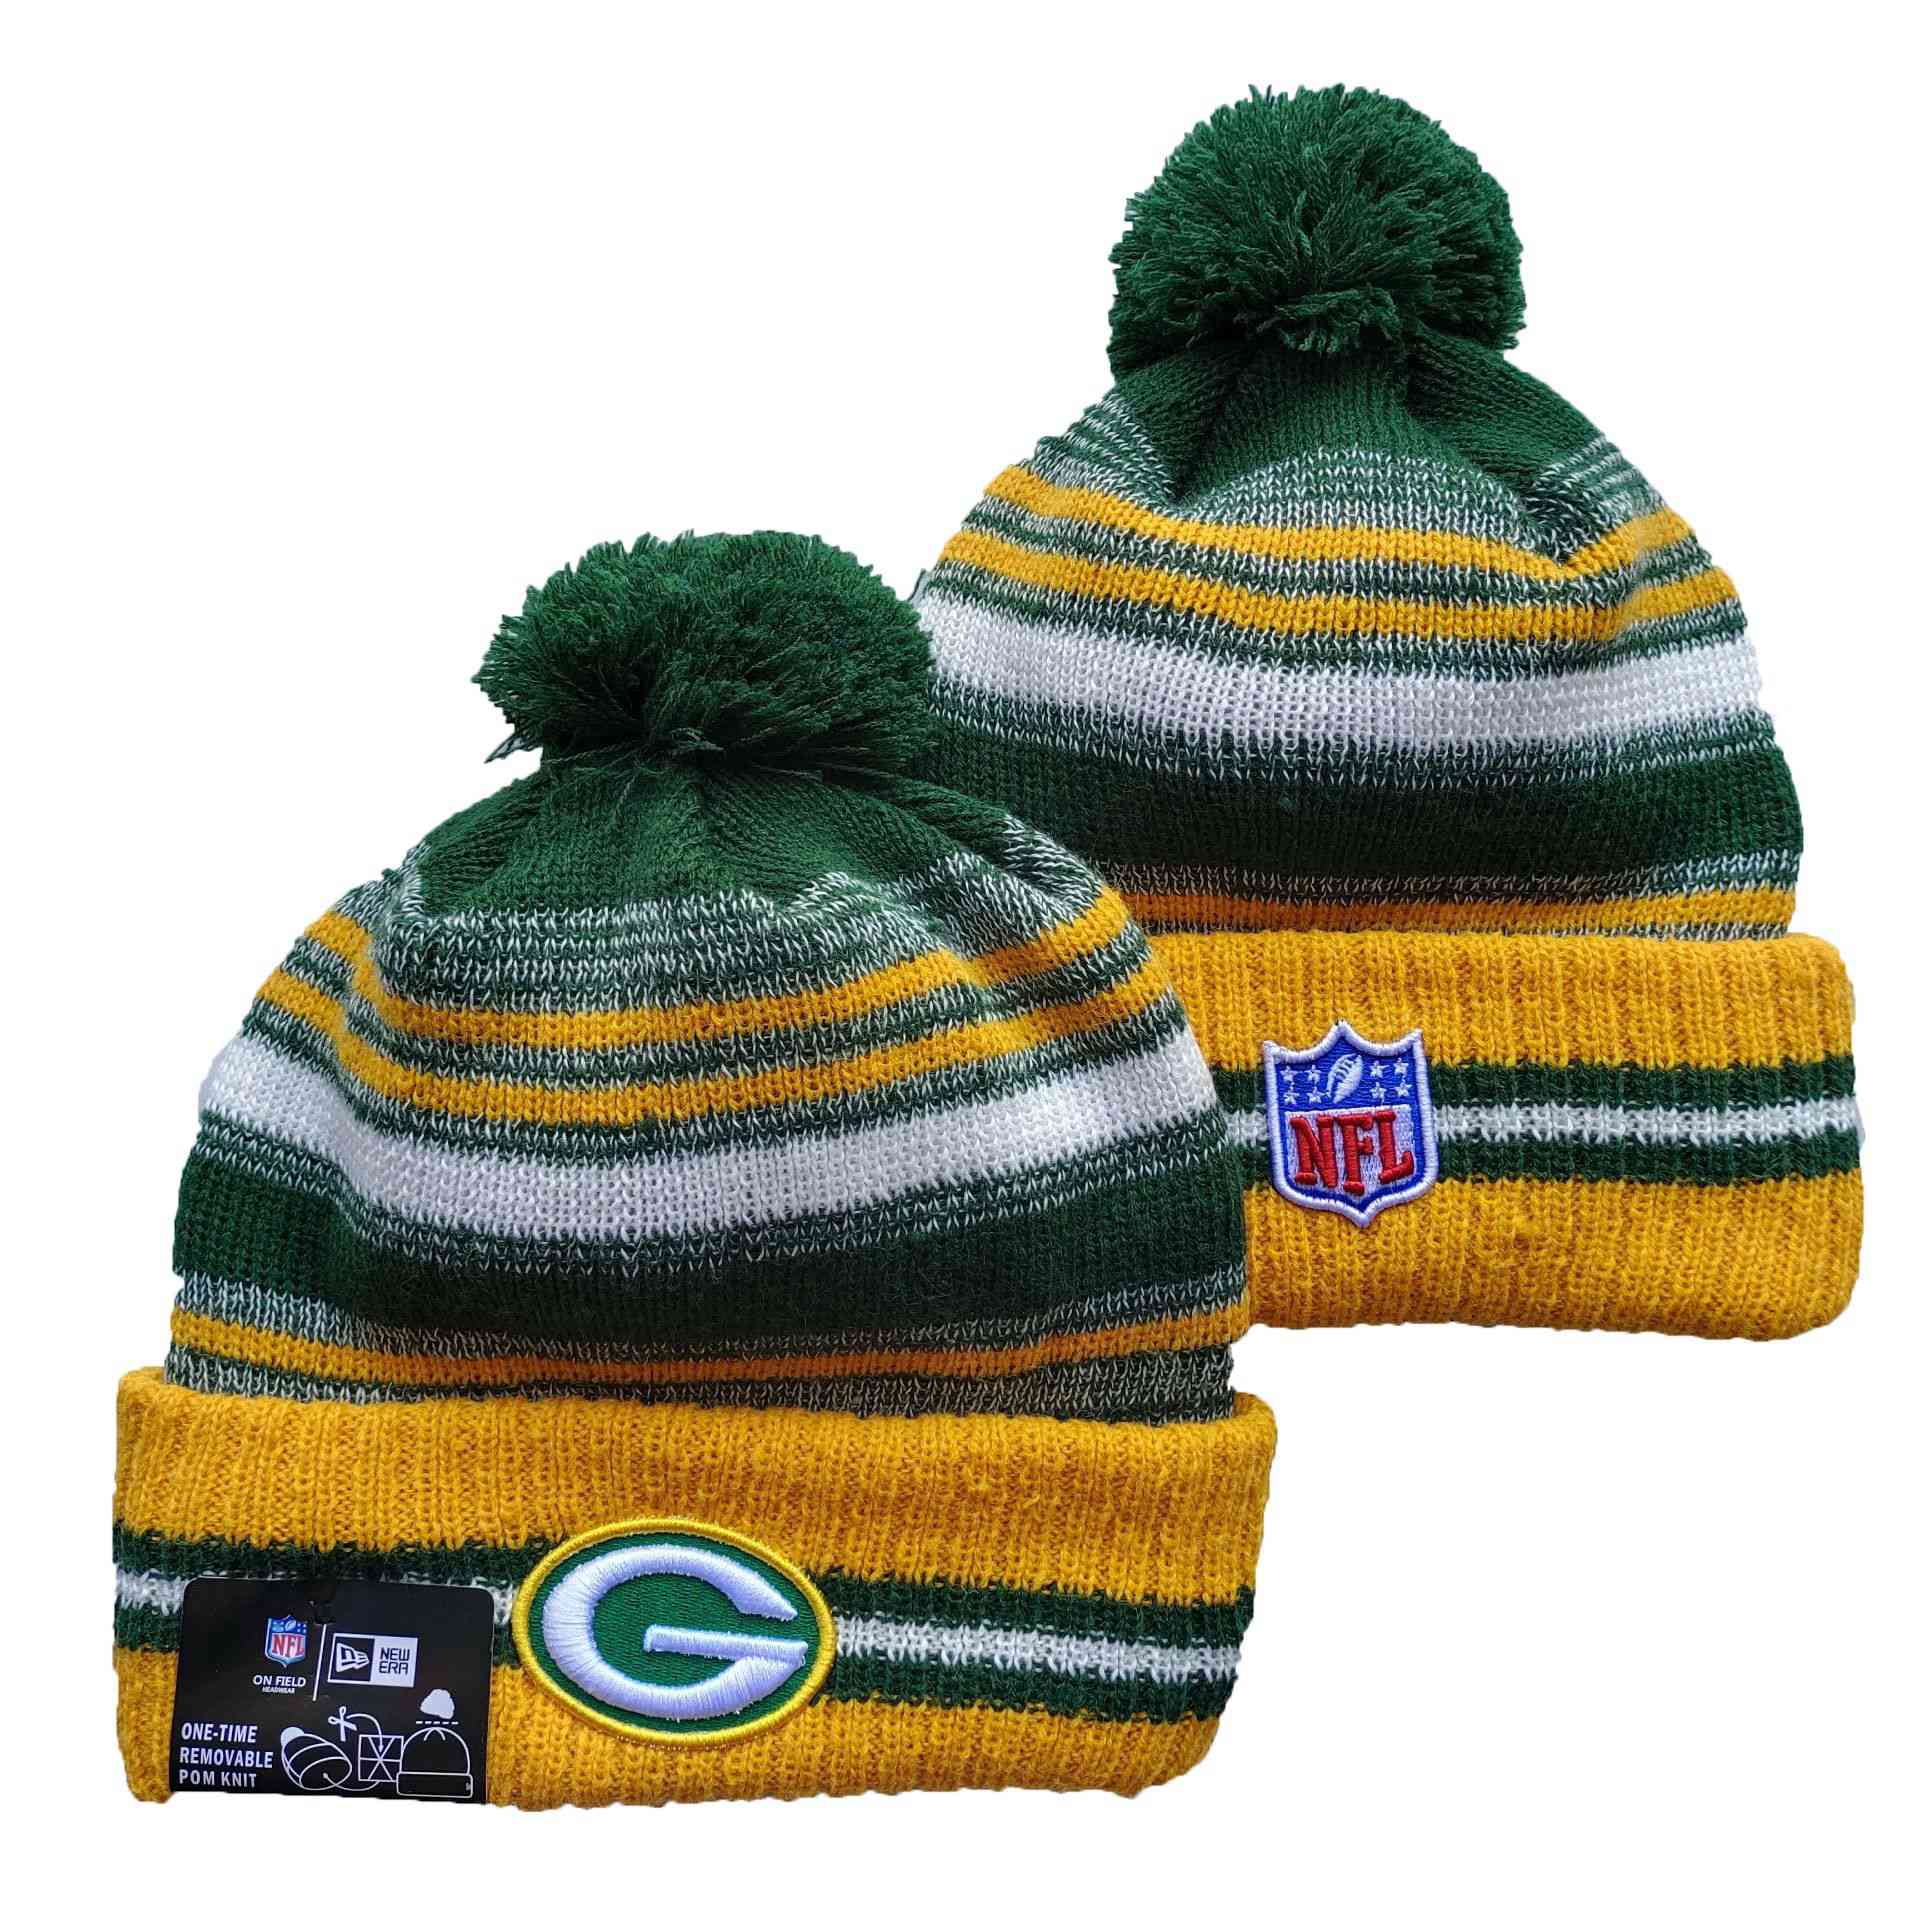 NFL Green Bay Packers Beanies Knit Hats-YD1183